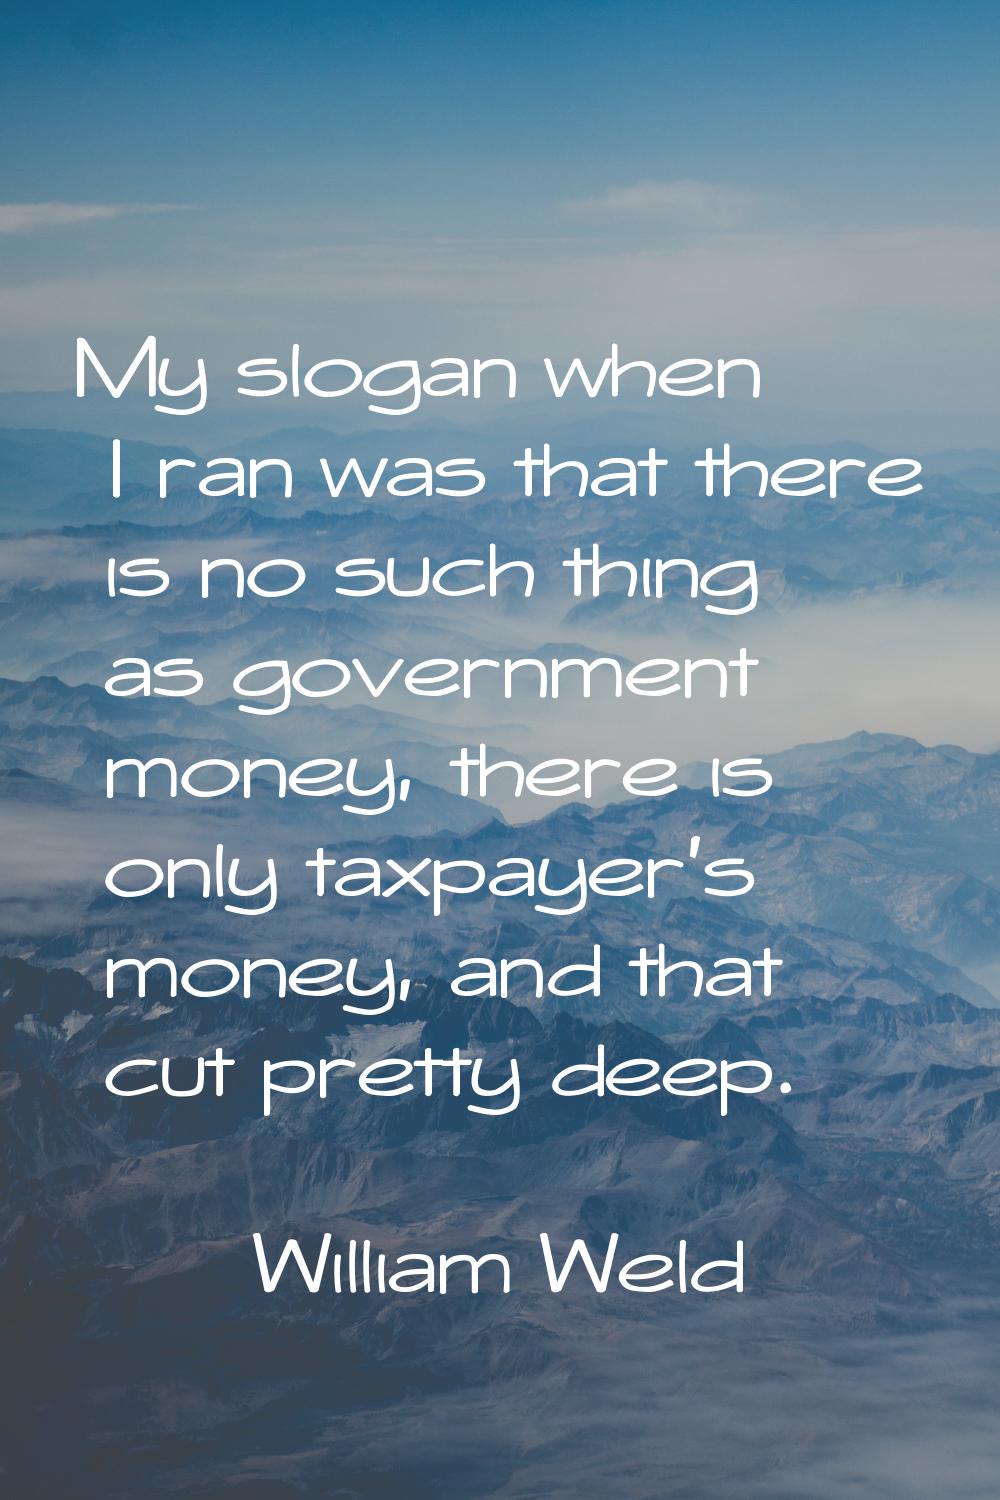 My slogan when I ran was that there is no such thing as government money, there is only taxpayer's 